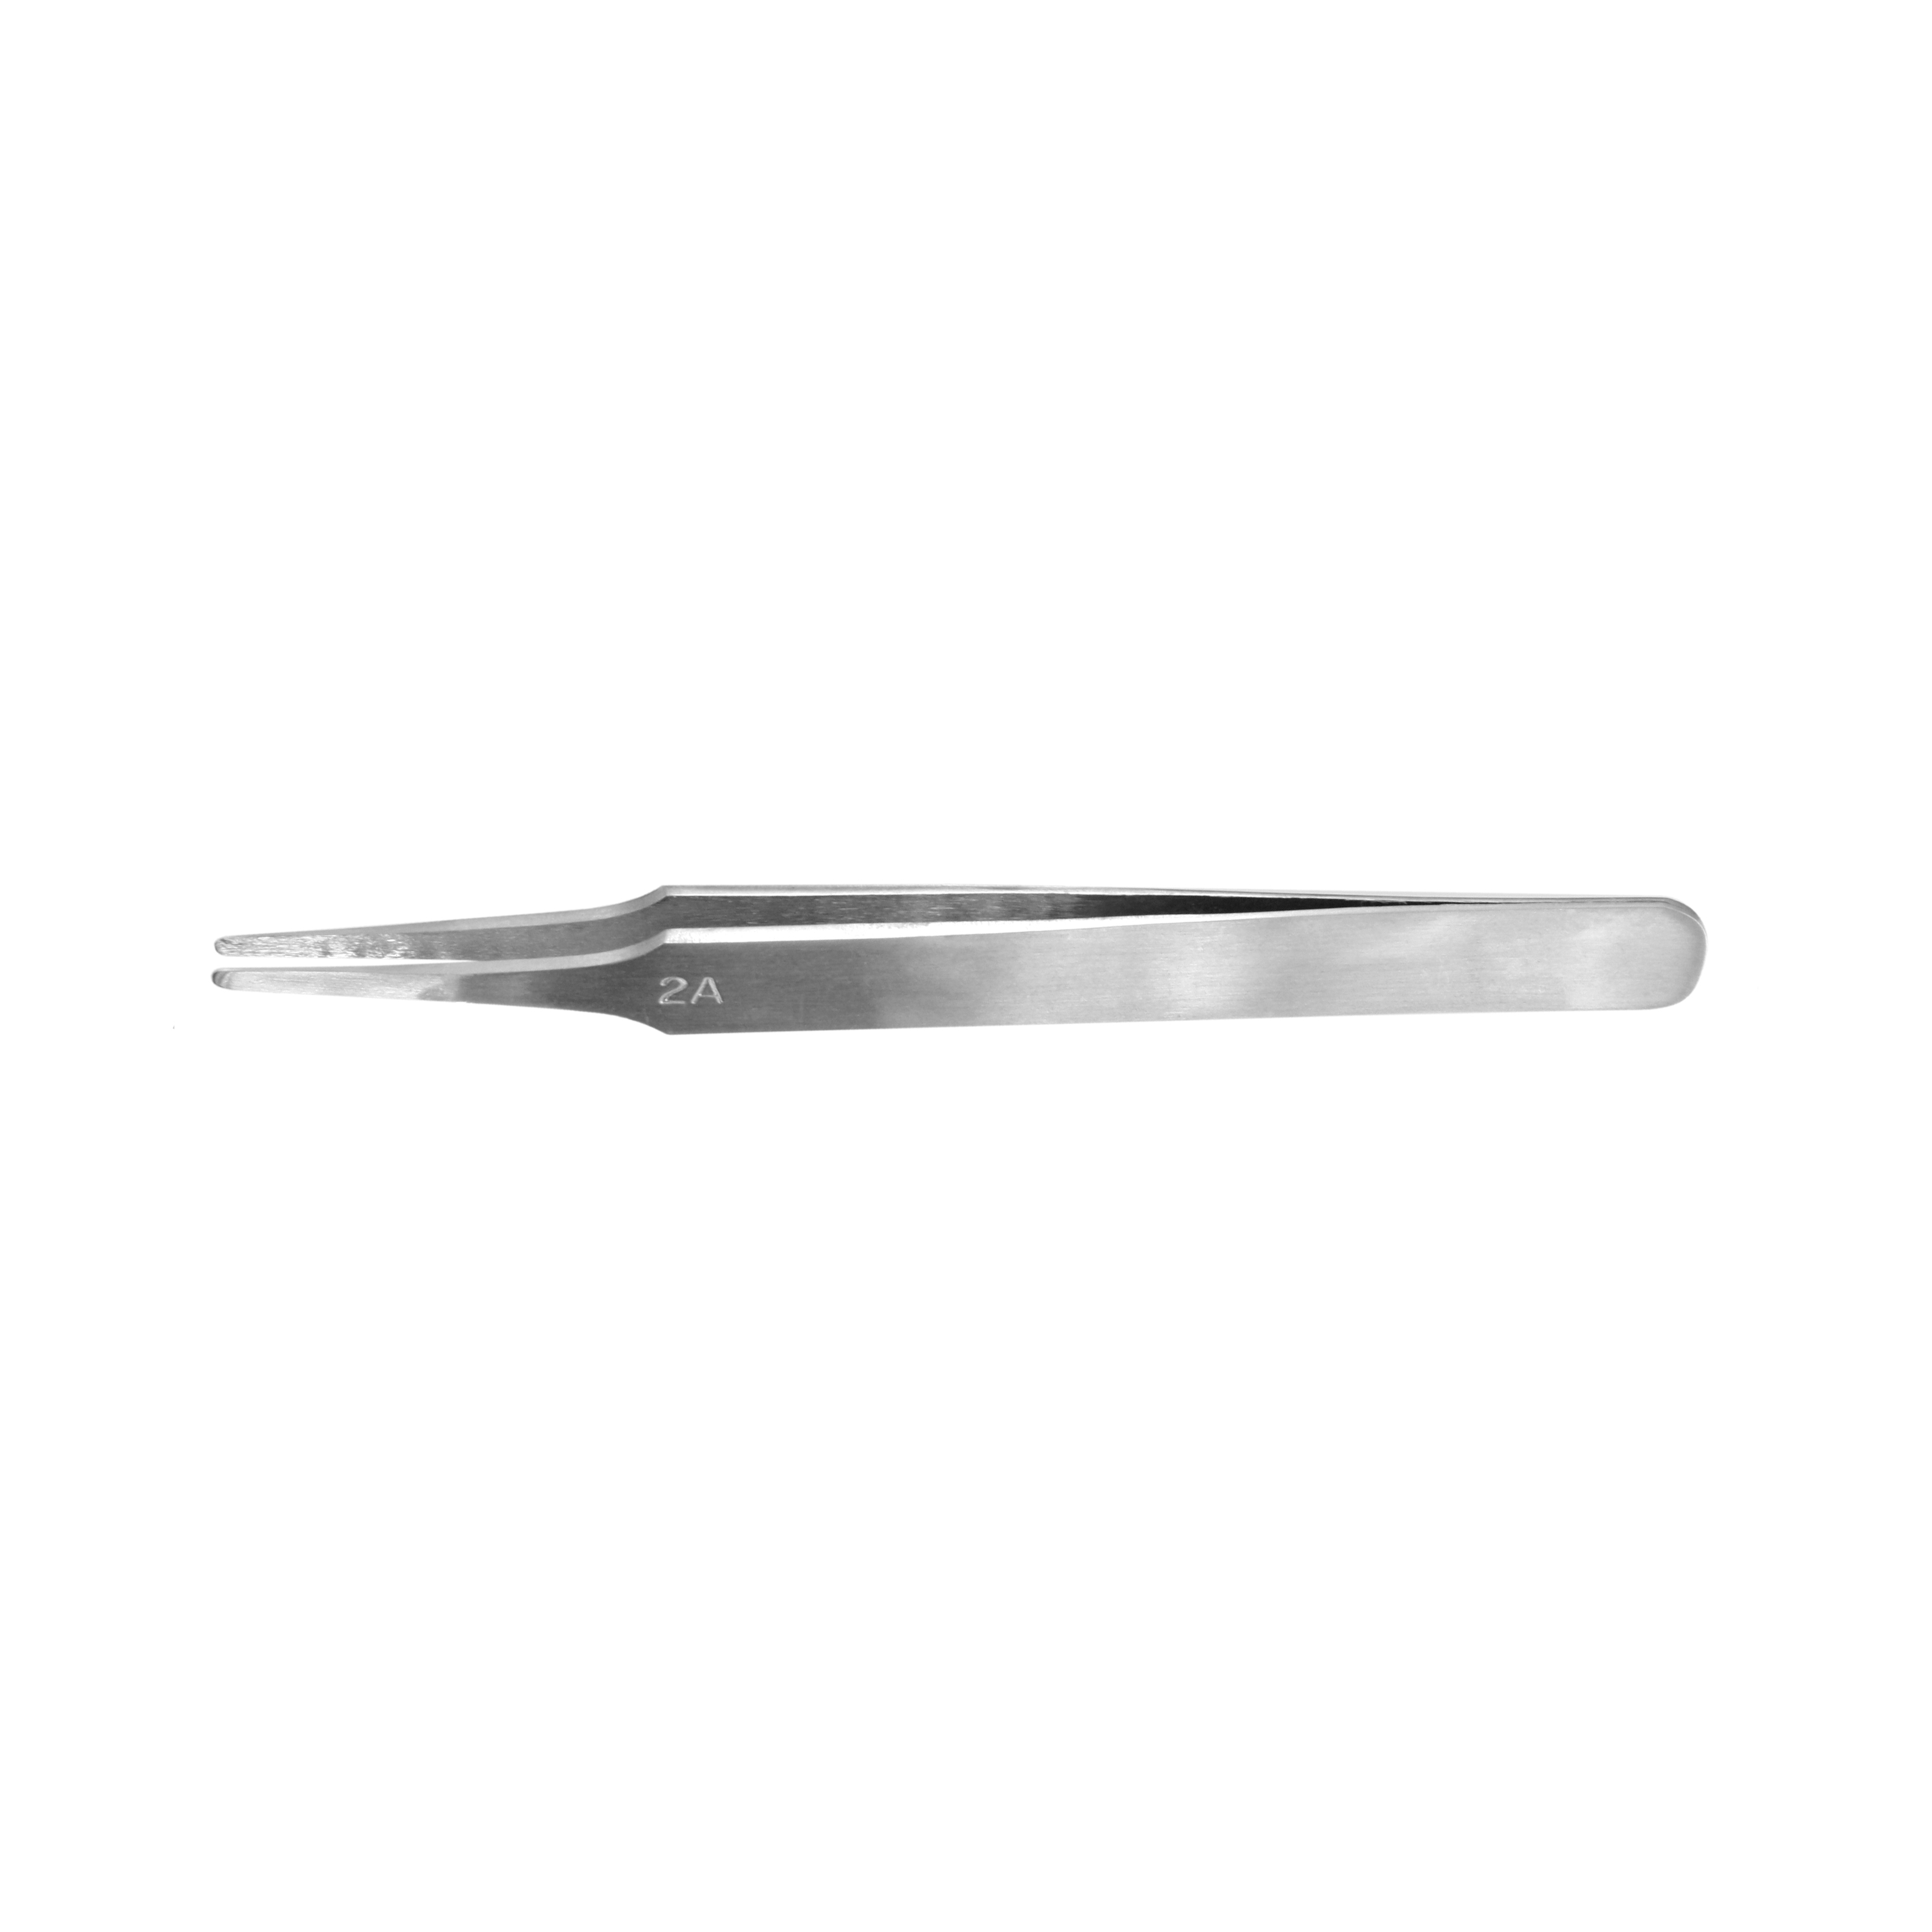 Vallejo Hobby Tools: Flat Rounded Stainless Steel Tweezers (120mm) 